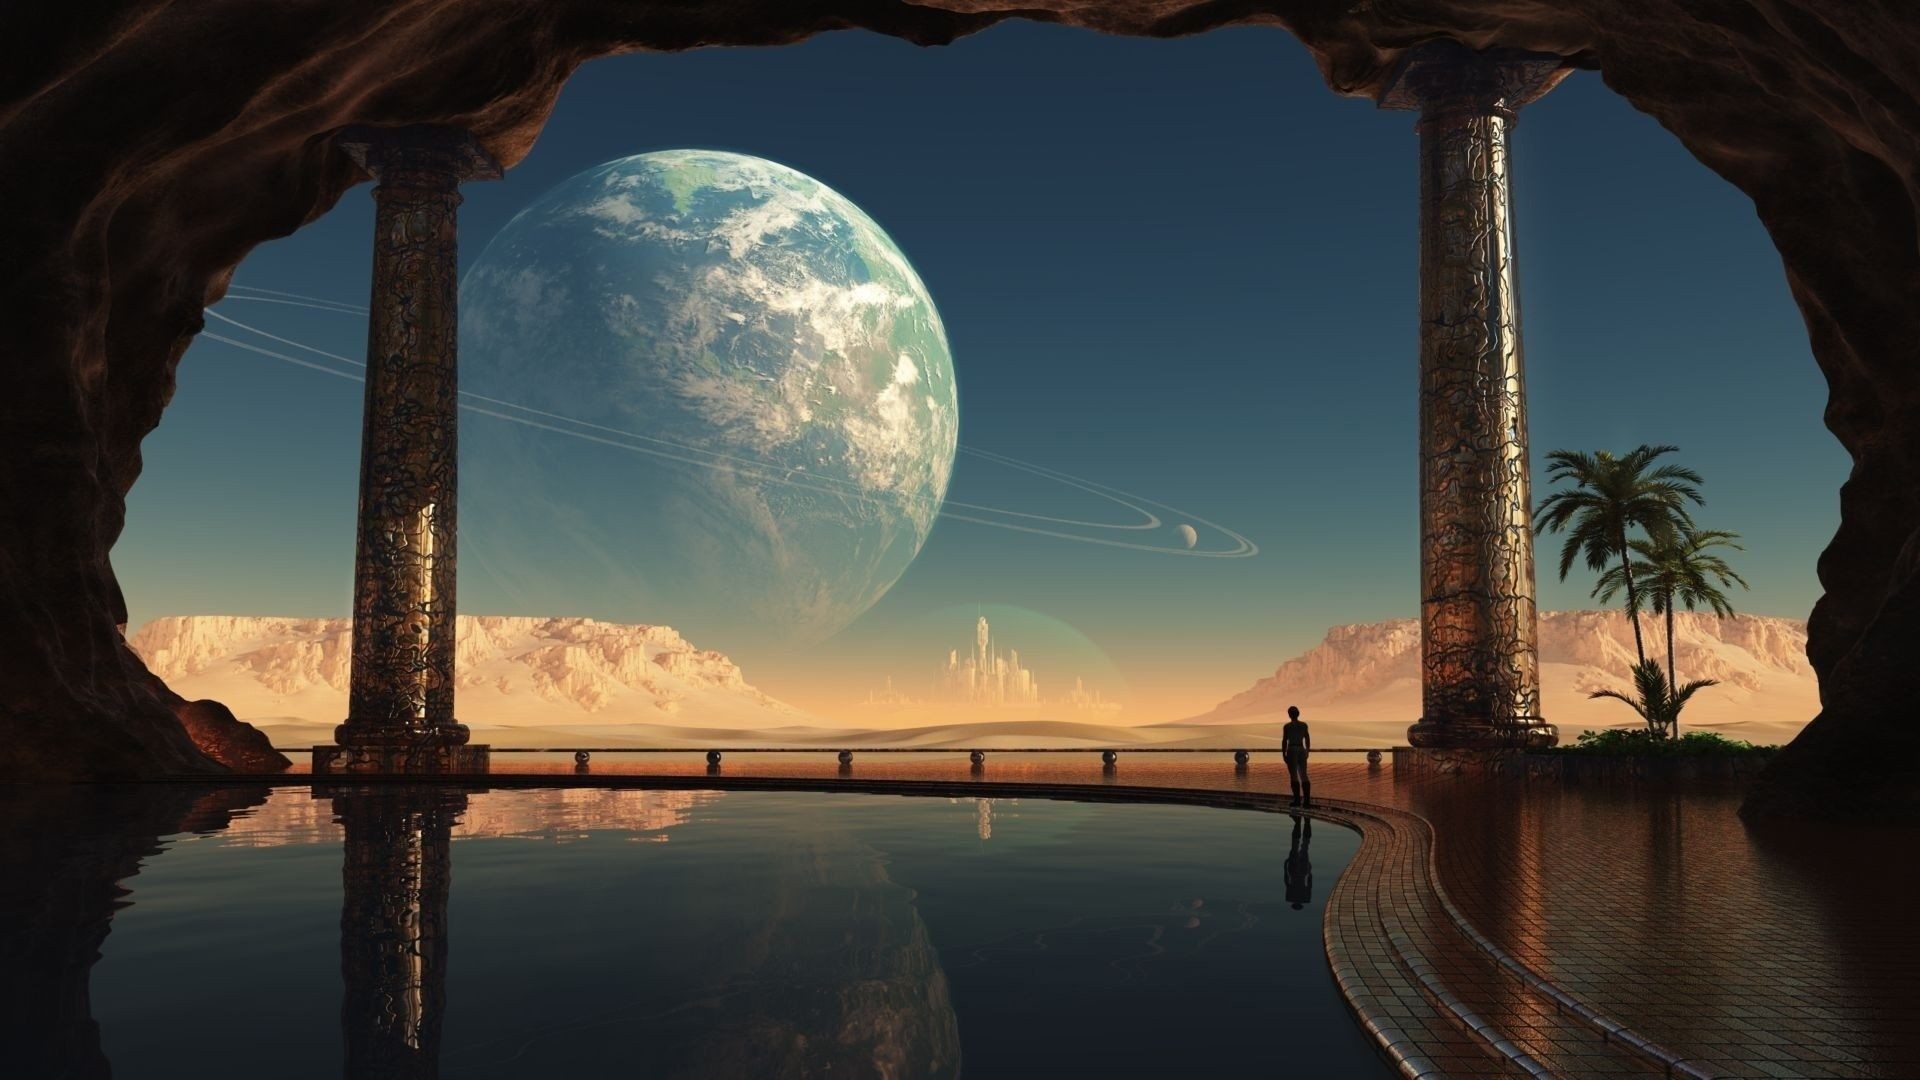 General 1920x1080 planet sky digital art planetary rings space water reflection